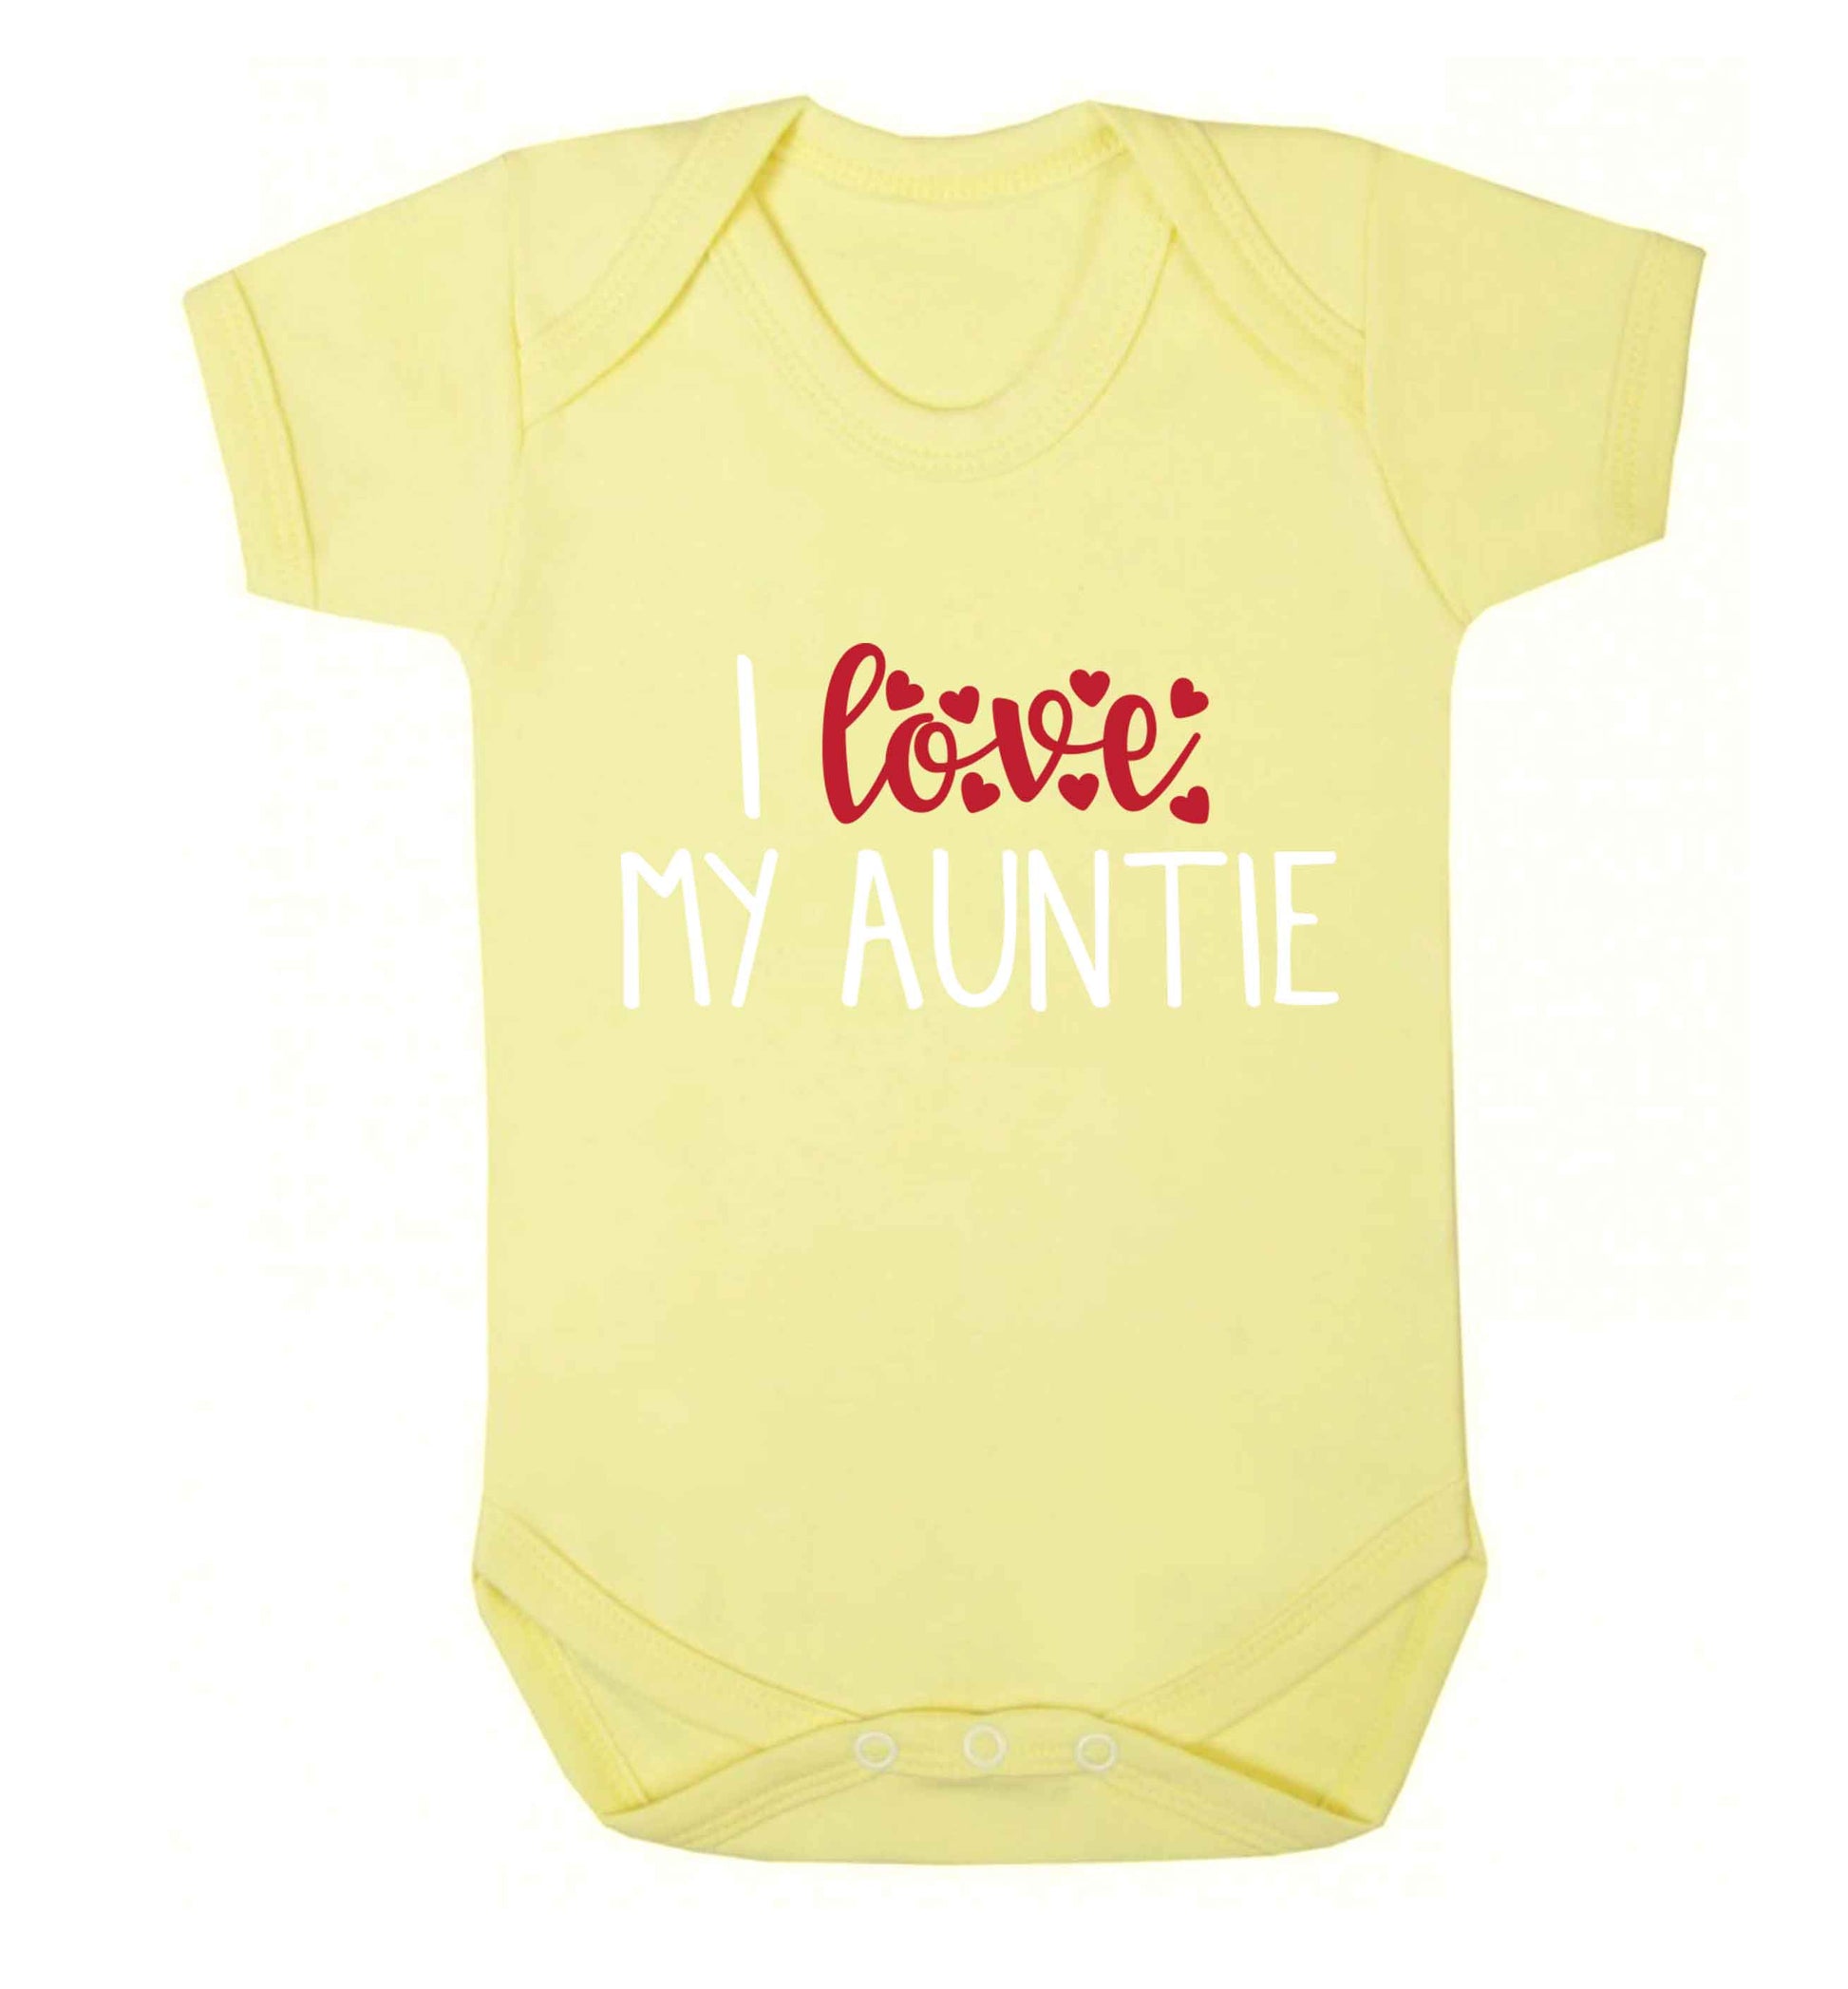 I love my auntie Baby Vest pale yellow 18-24 months